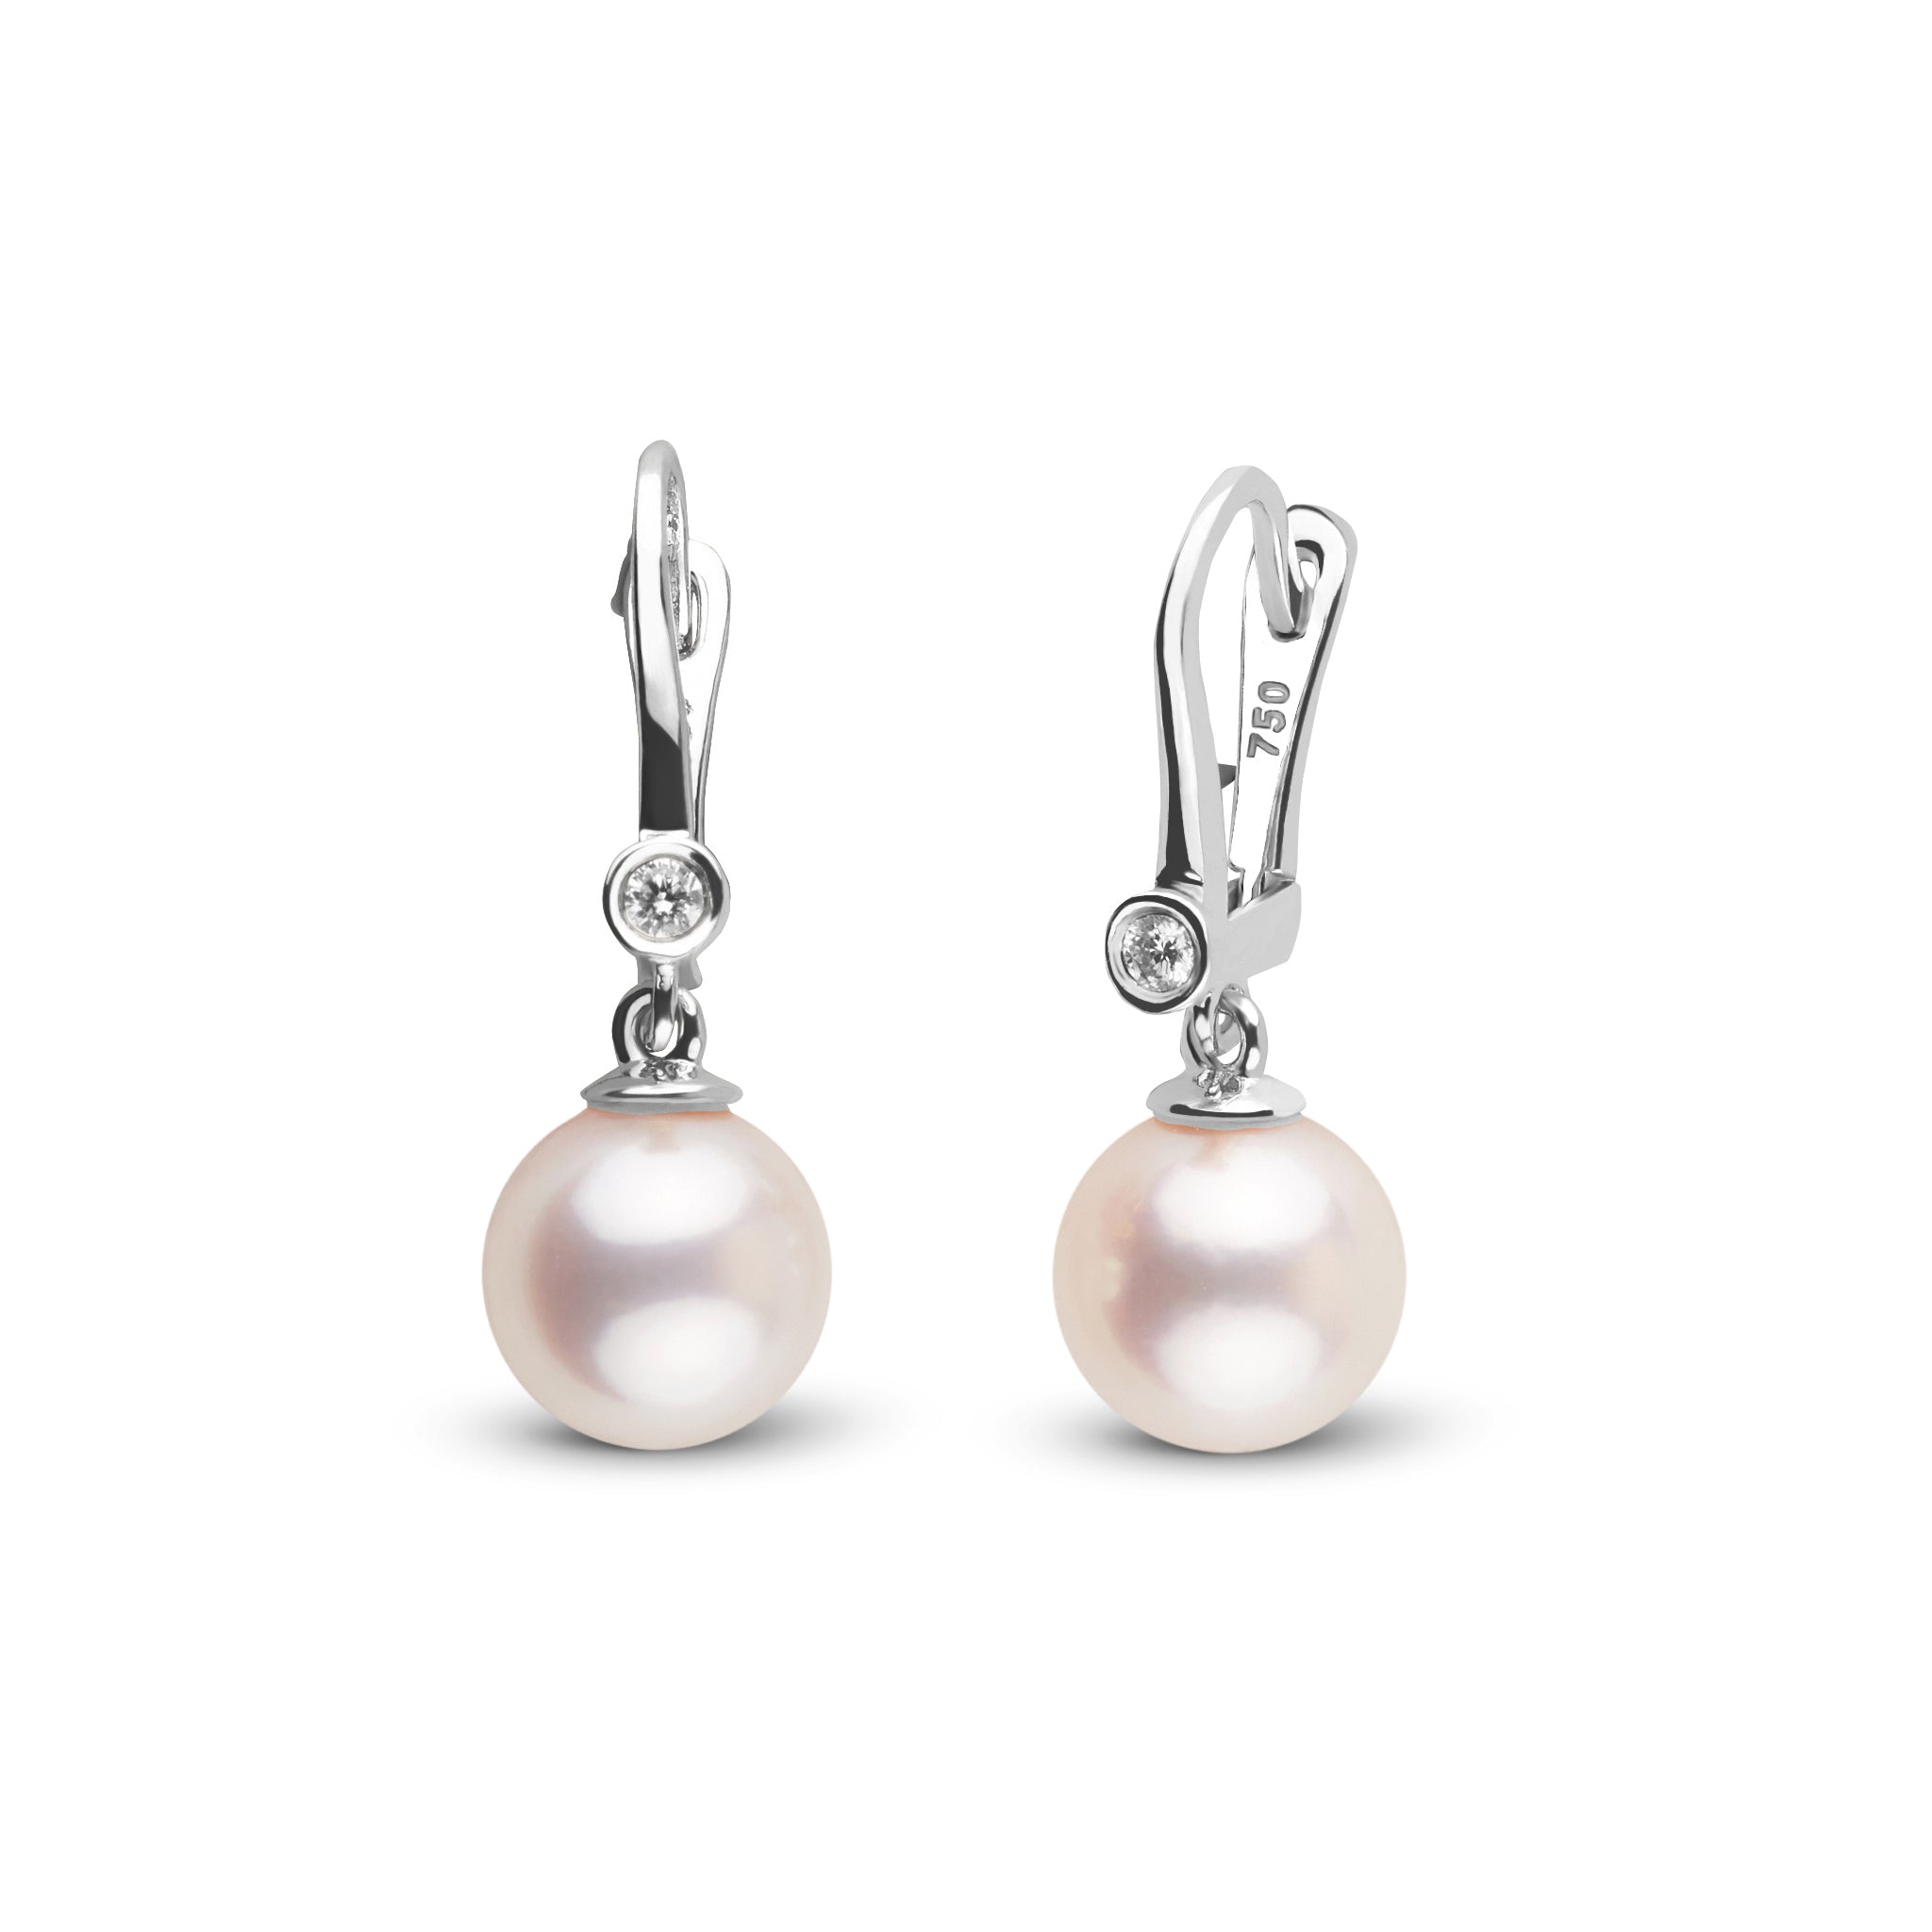 18K Romantic Collection 8.5-9.0 mm Akoya Pearl and Diamond Earrings White Gold